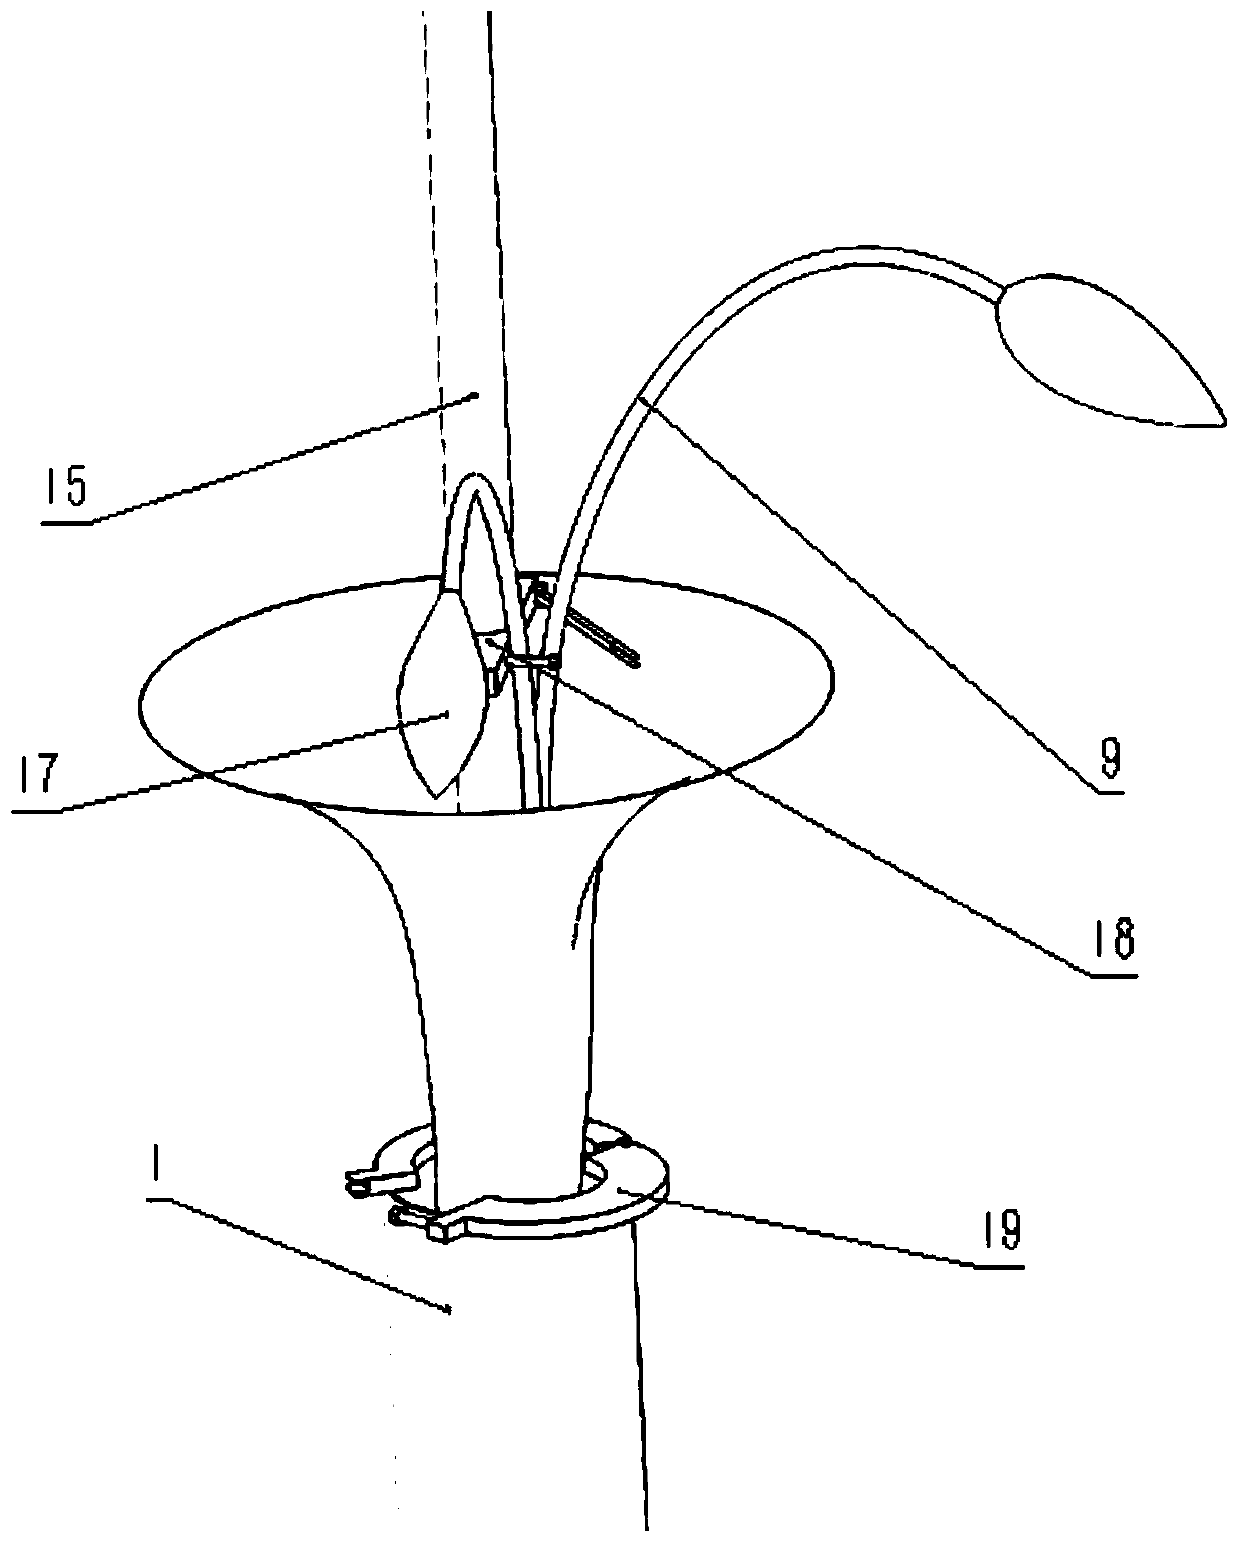 Gastrointestinal foreign matter taking-out device